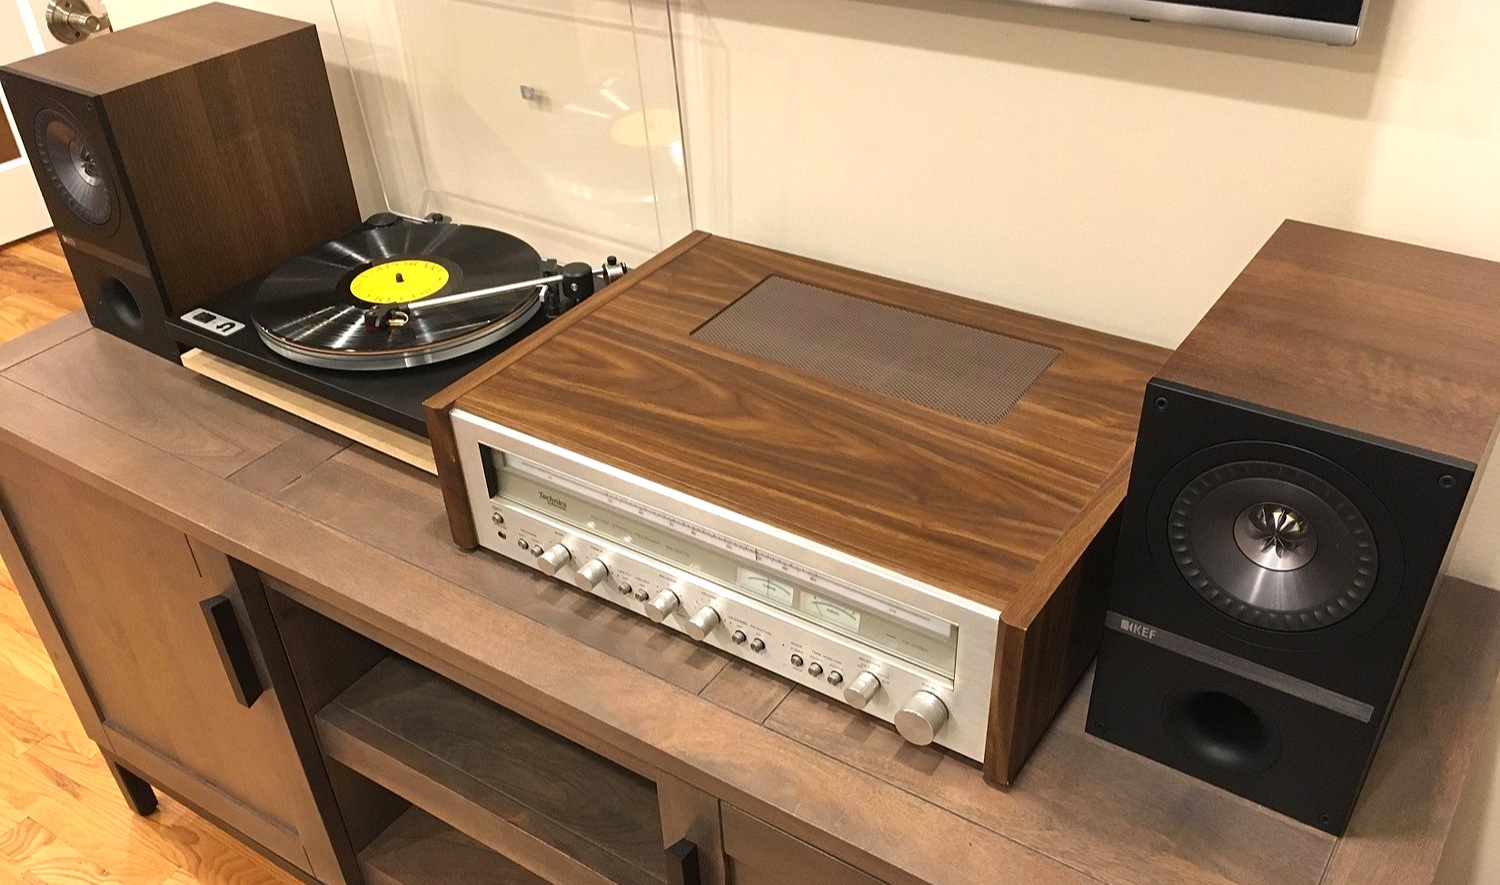 A modern vintage hybrid setup with a late 70’s Technics receiver paired with a modern U-Turn Orbit and pair of KEF Q100 speakers